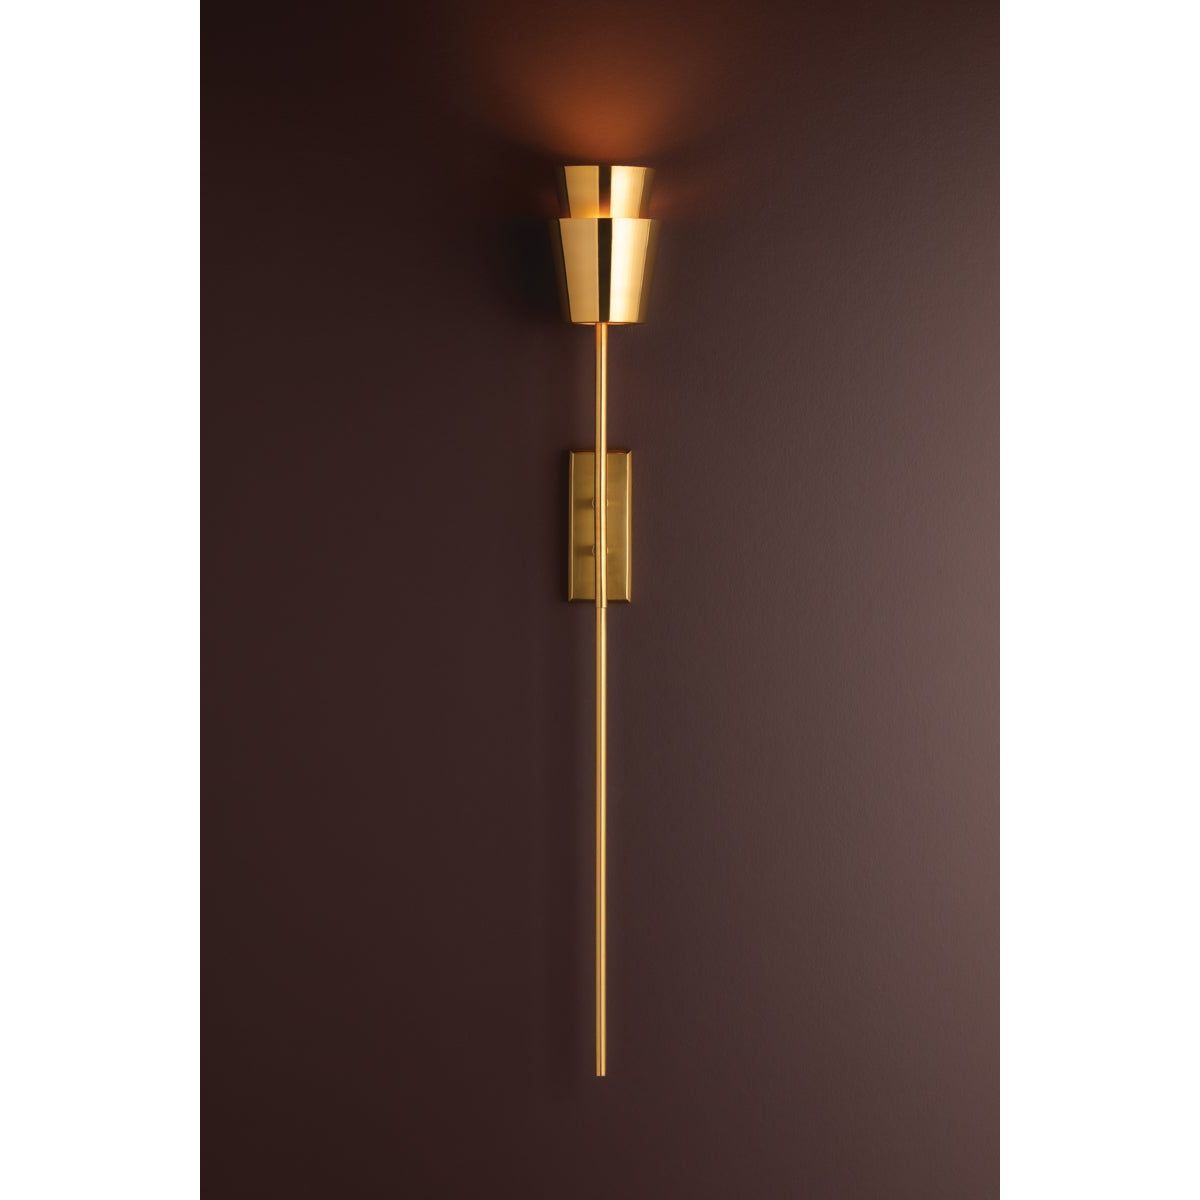 Buenos Aires 1-Light Wall Sconce